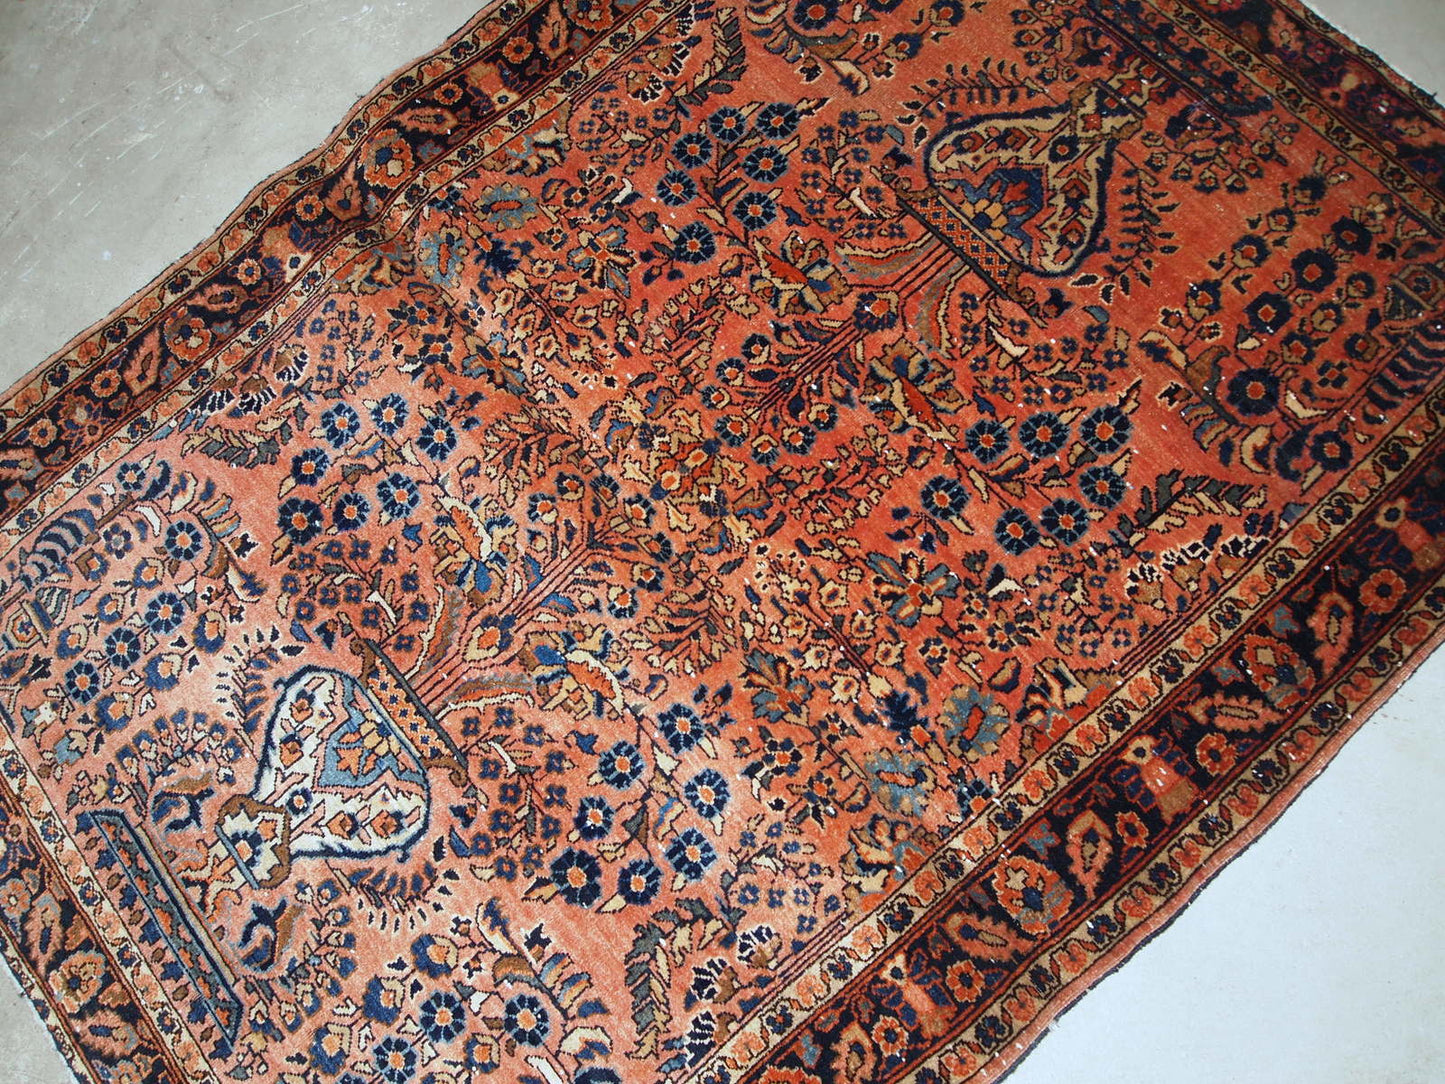 Hand-weaved antique Sarouk rug from the beginning of 20th century. The rug is in original good condition.